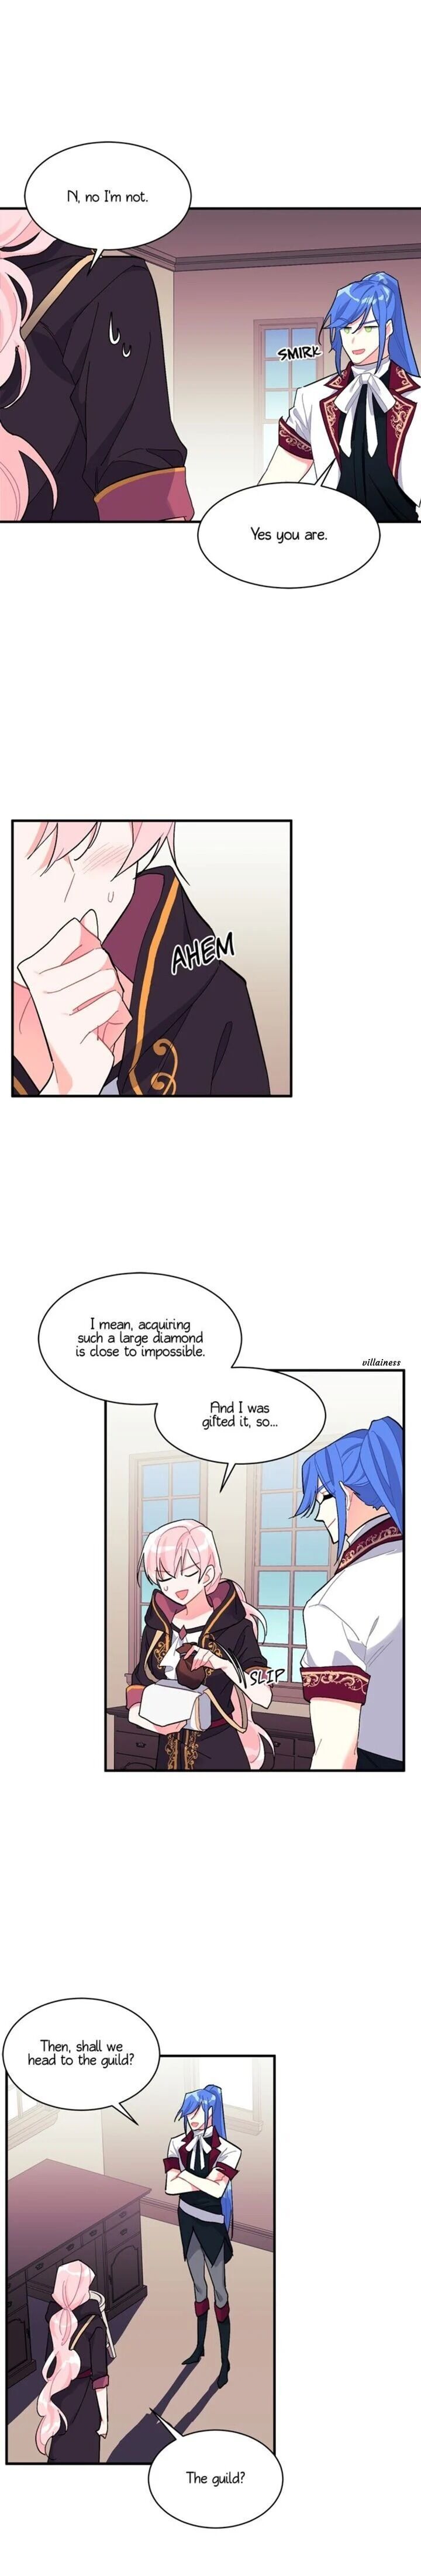 Sica Wolf Chapter 088 page 4